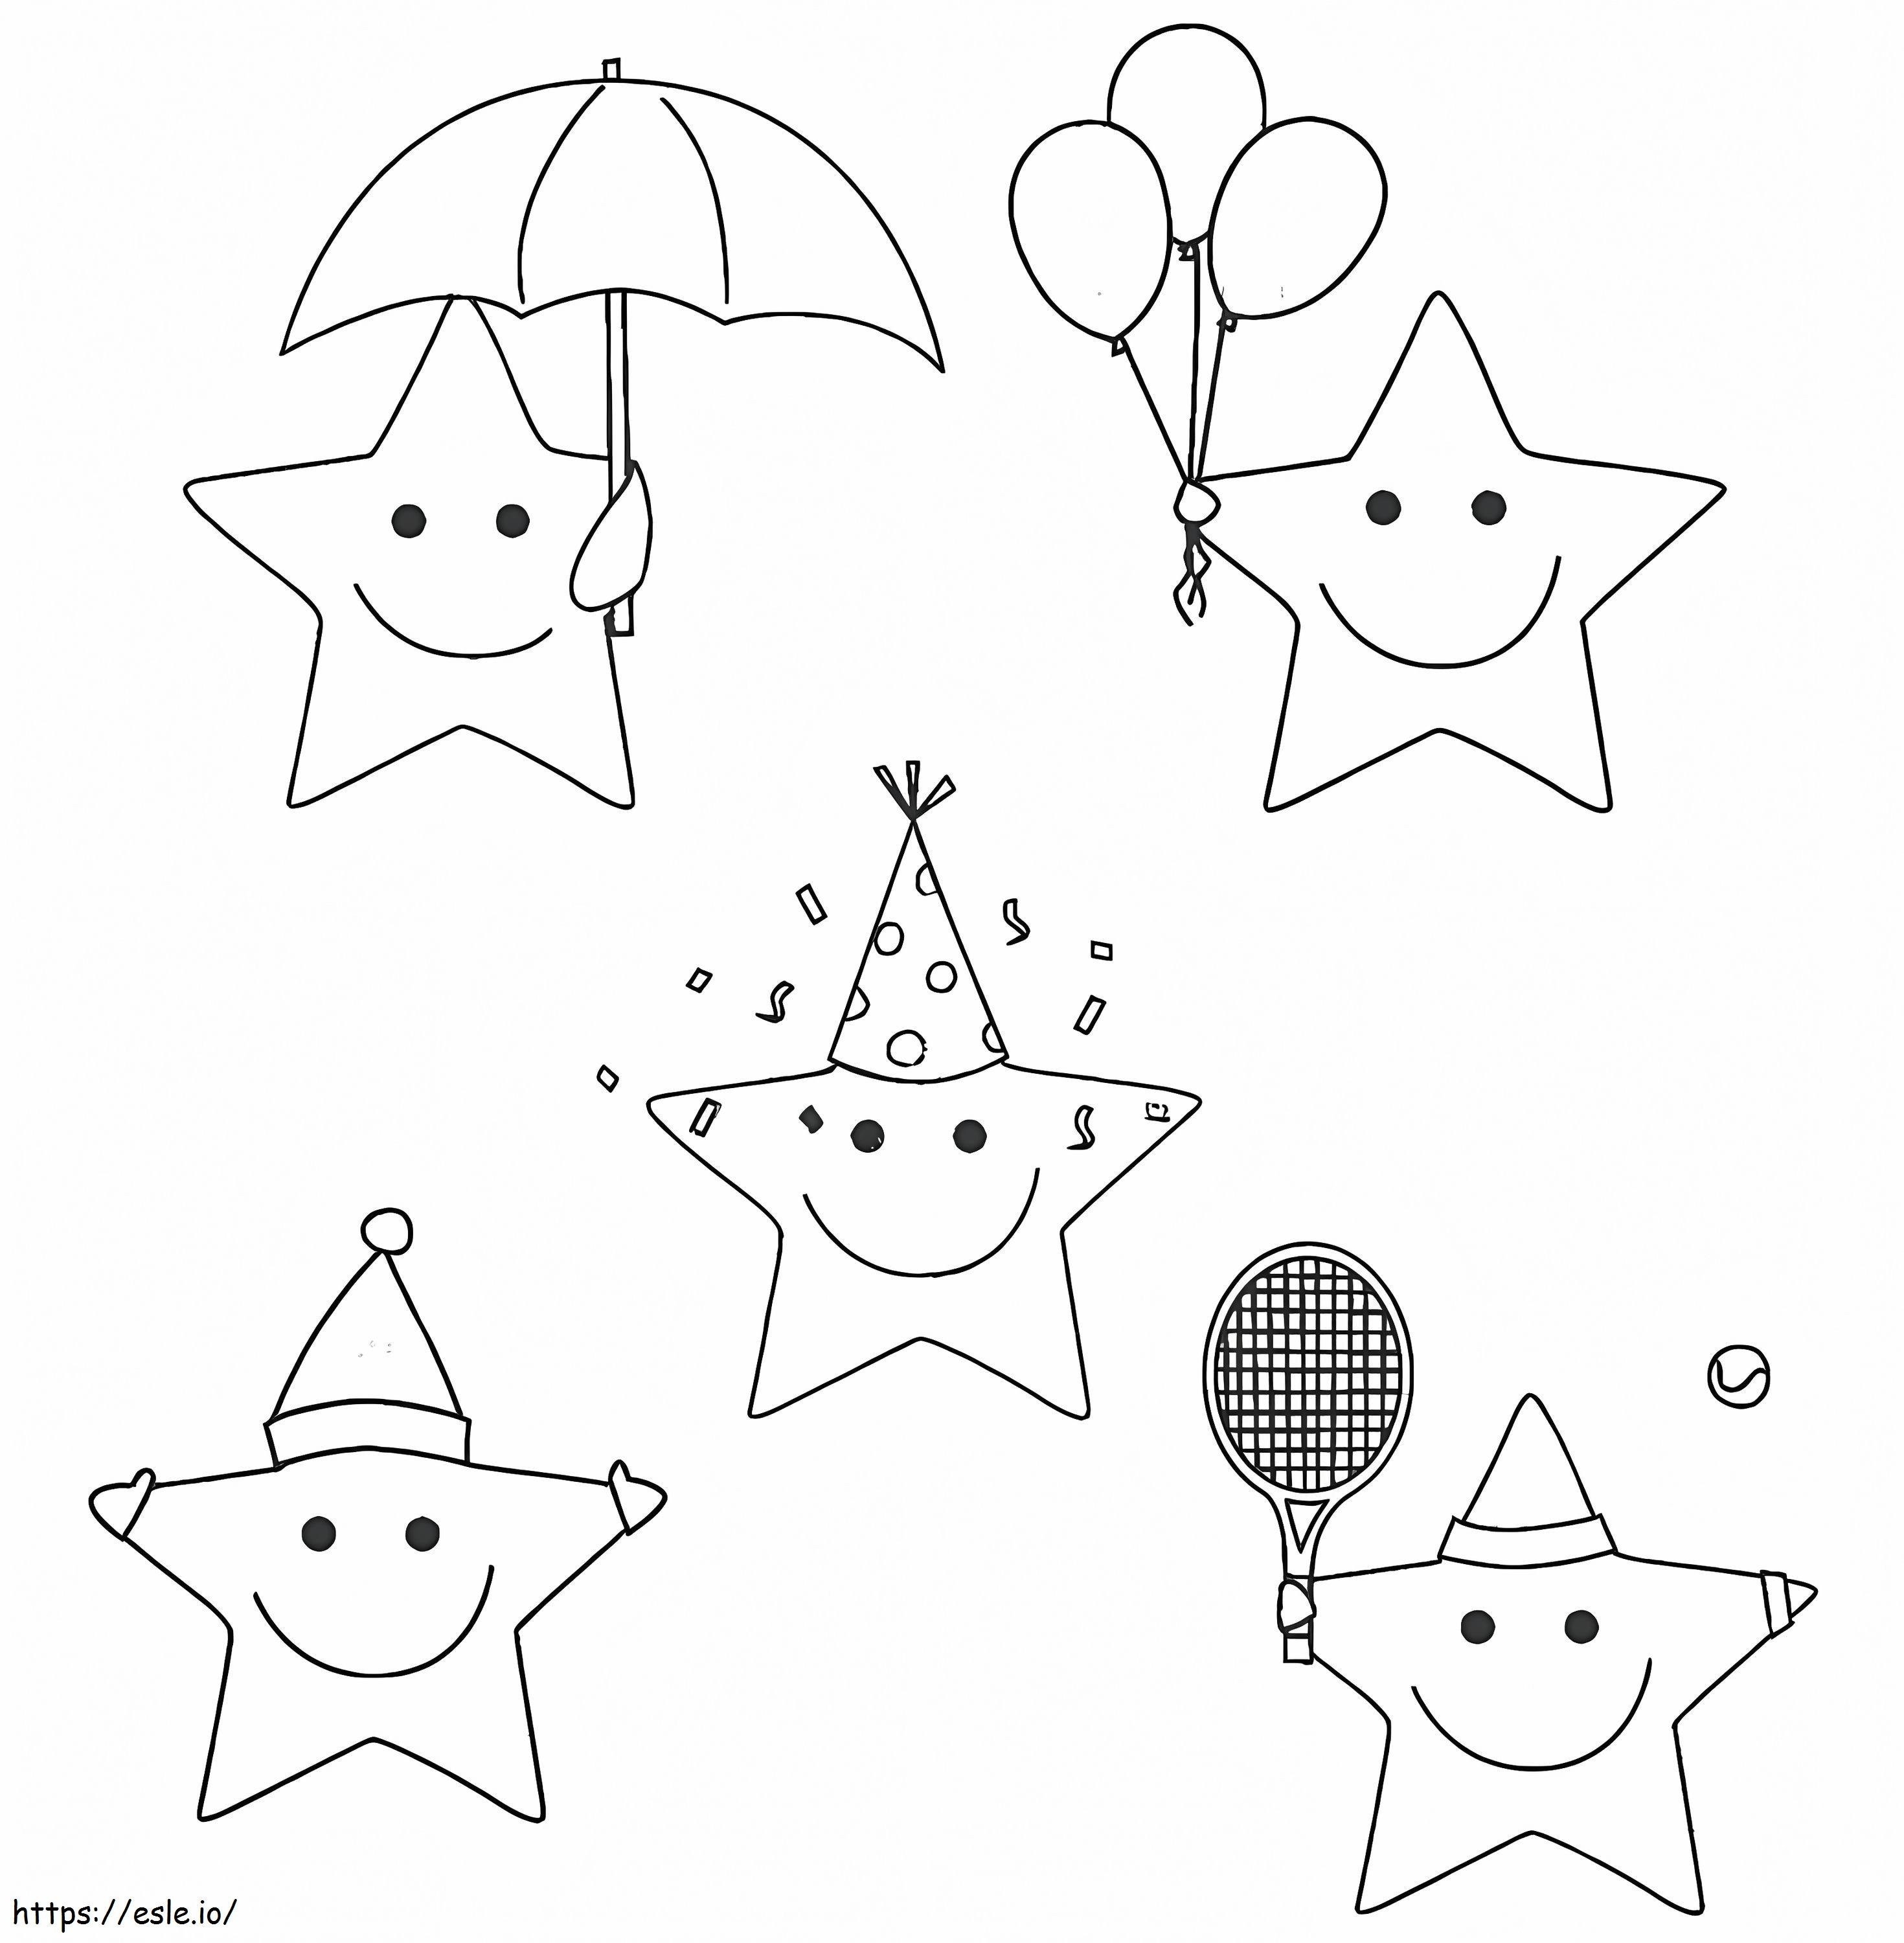 Five Cute Stars coloring page